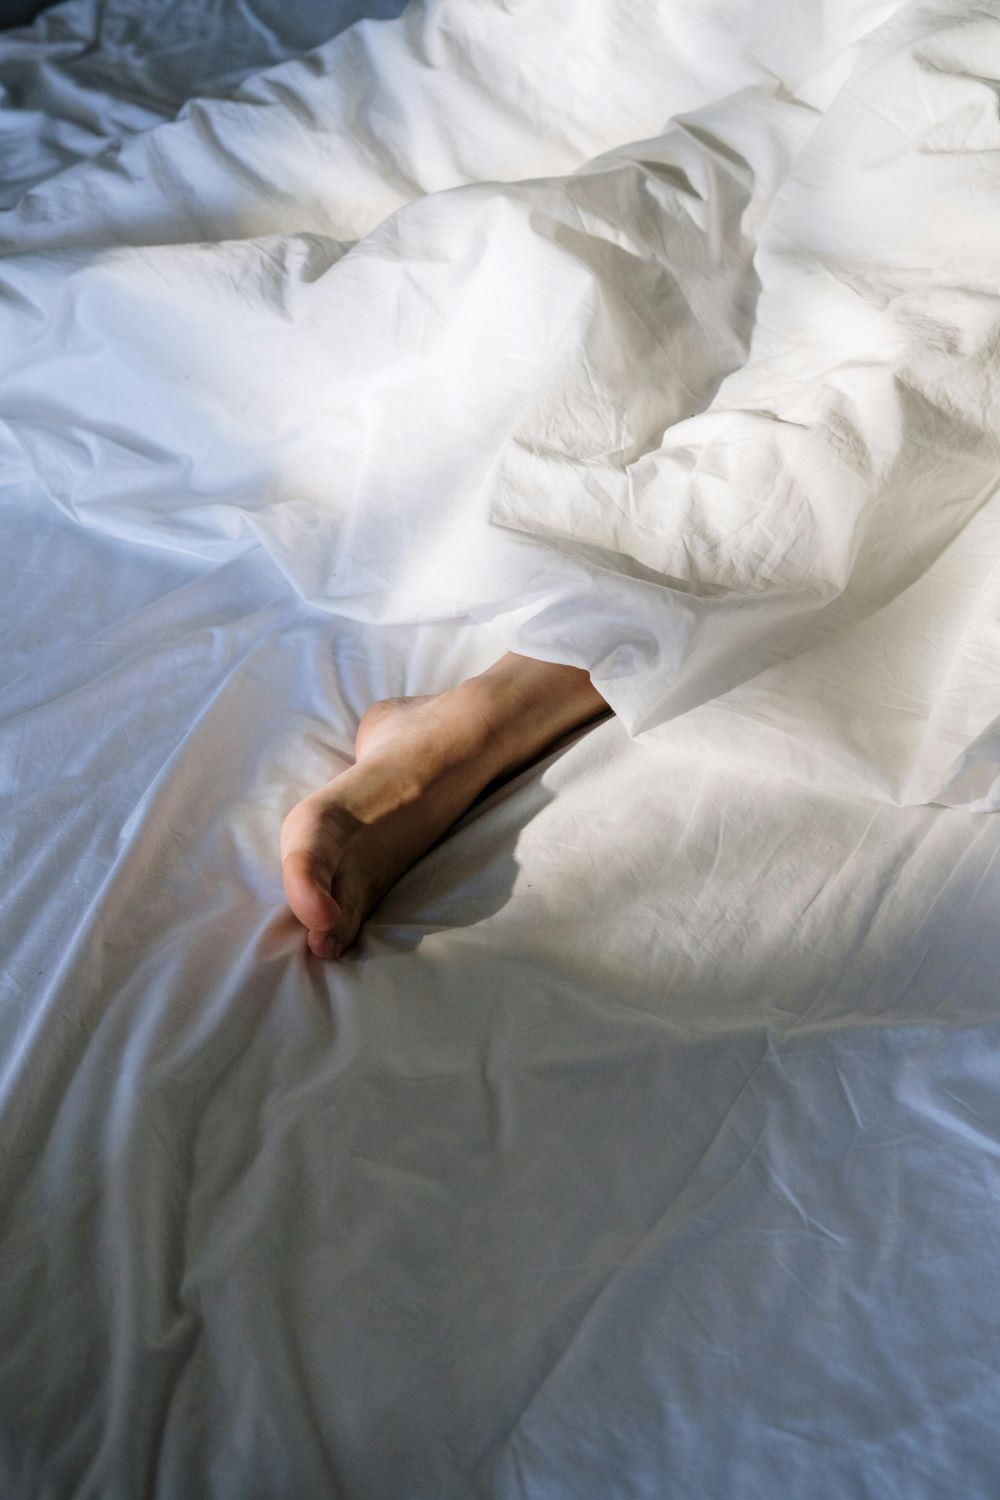 Sleep Issues Can be Closely Tied to Mental Health Disorders